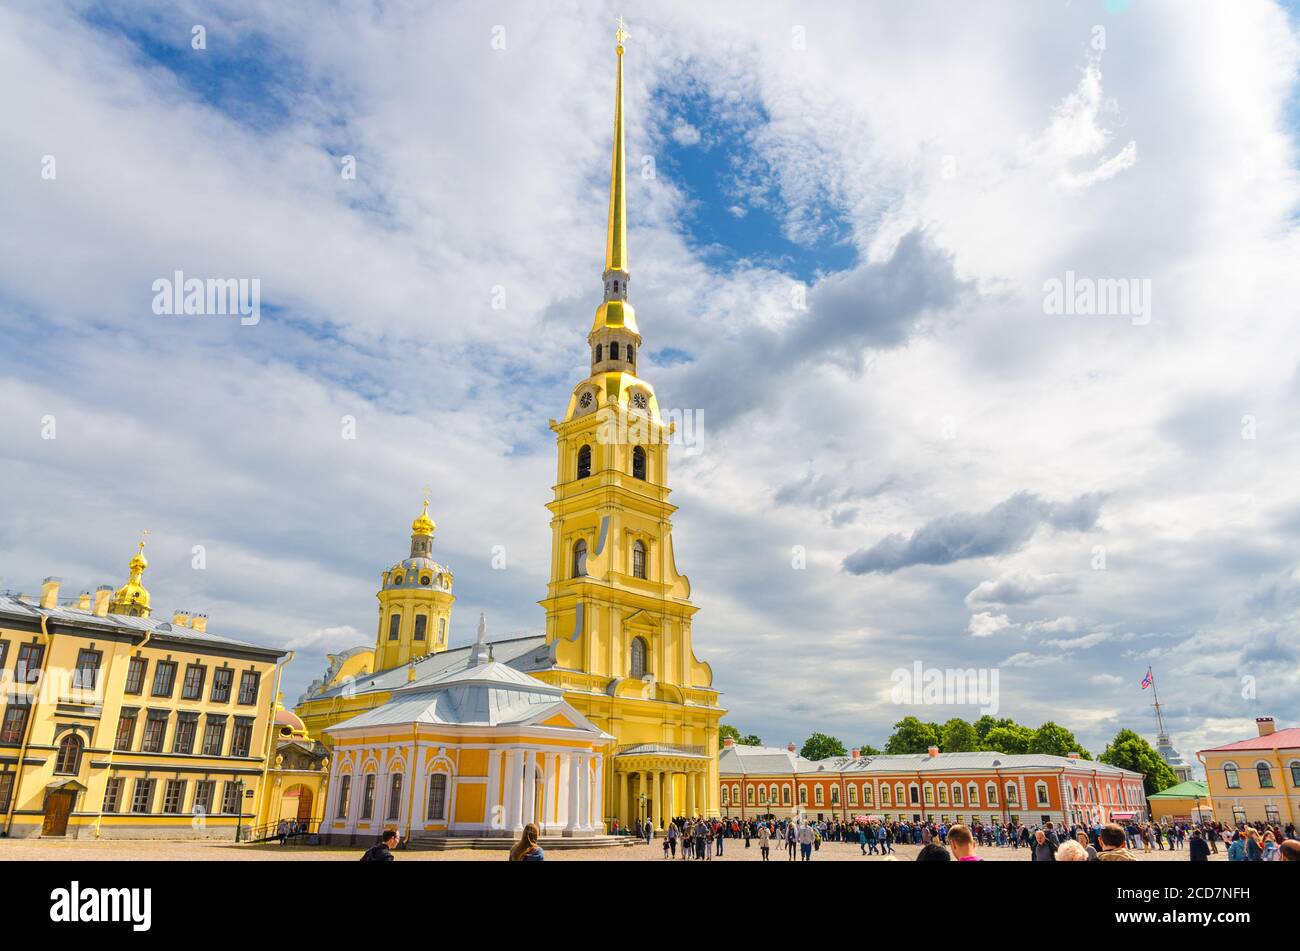 Saint Petersburg, Russia, August 5, 2019: Saints Peter and Paul Cathedral Orthodox church with golden spire in Peter and Paul Fortress citadel on Zayachy Hare Island, Leningrad city Stock Photo